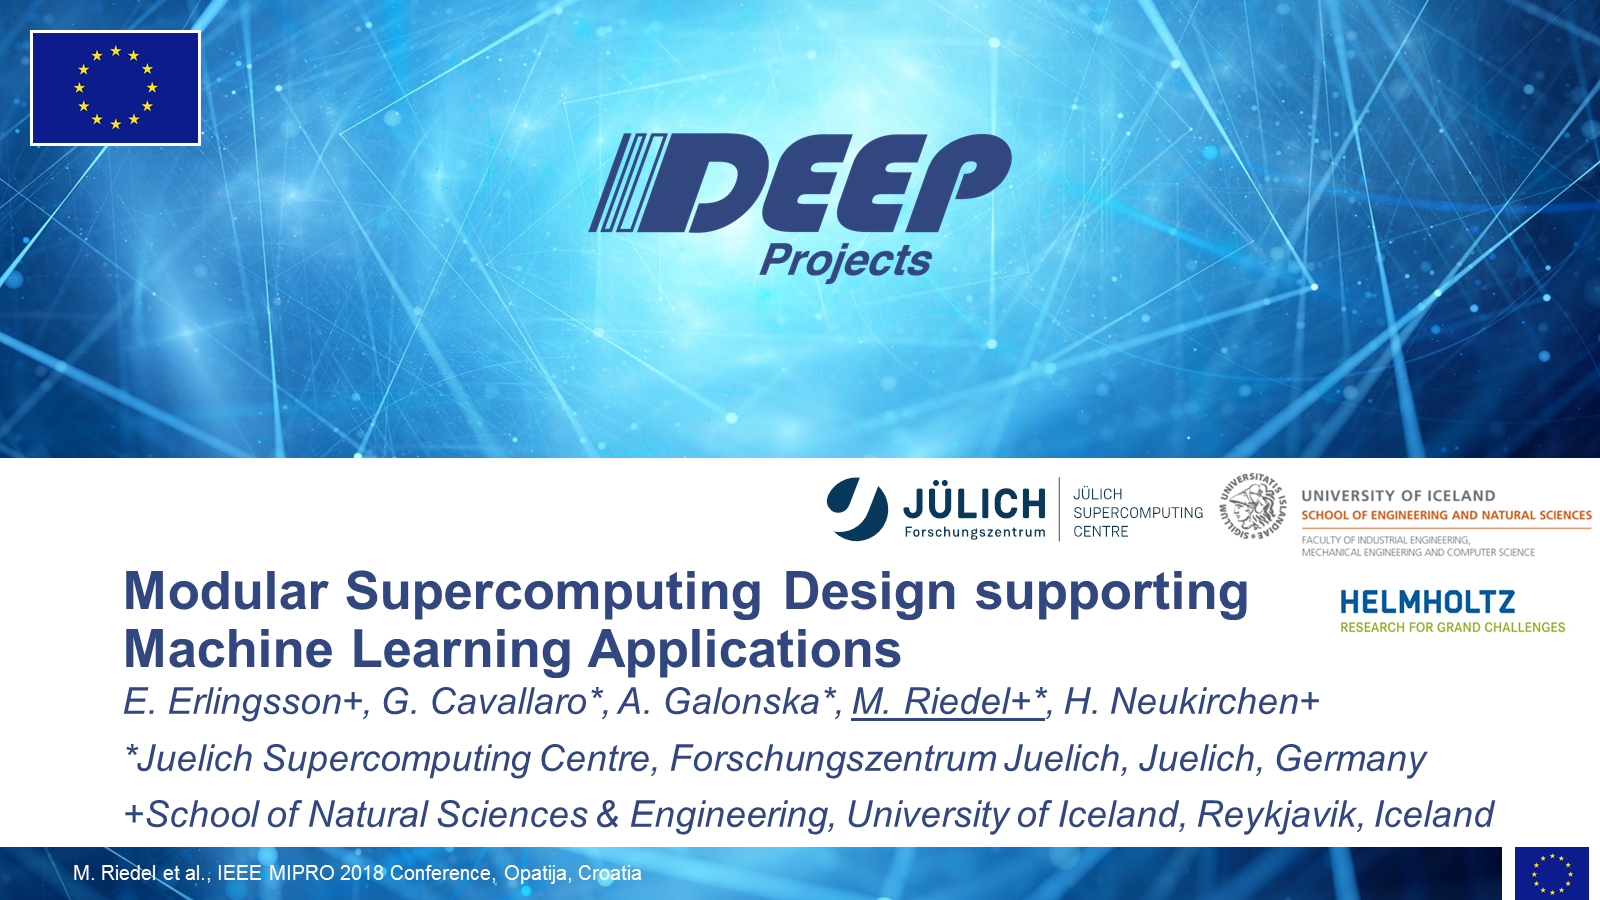 Modular Supercomputing Design supporting Machine Learning Applications